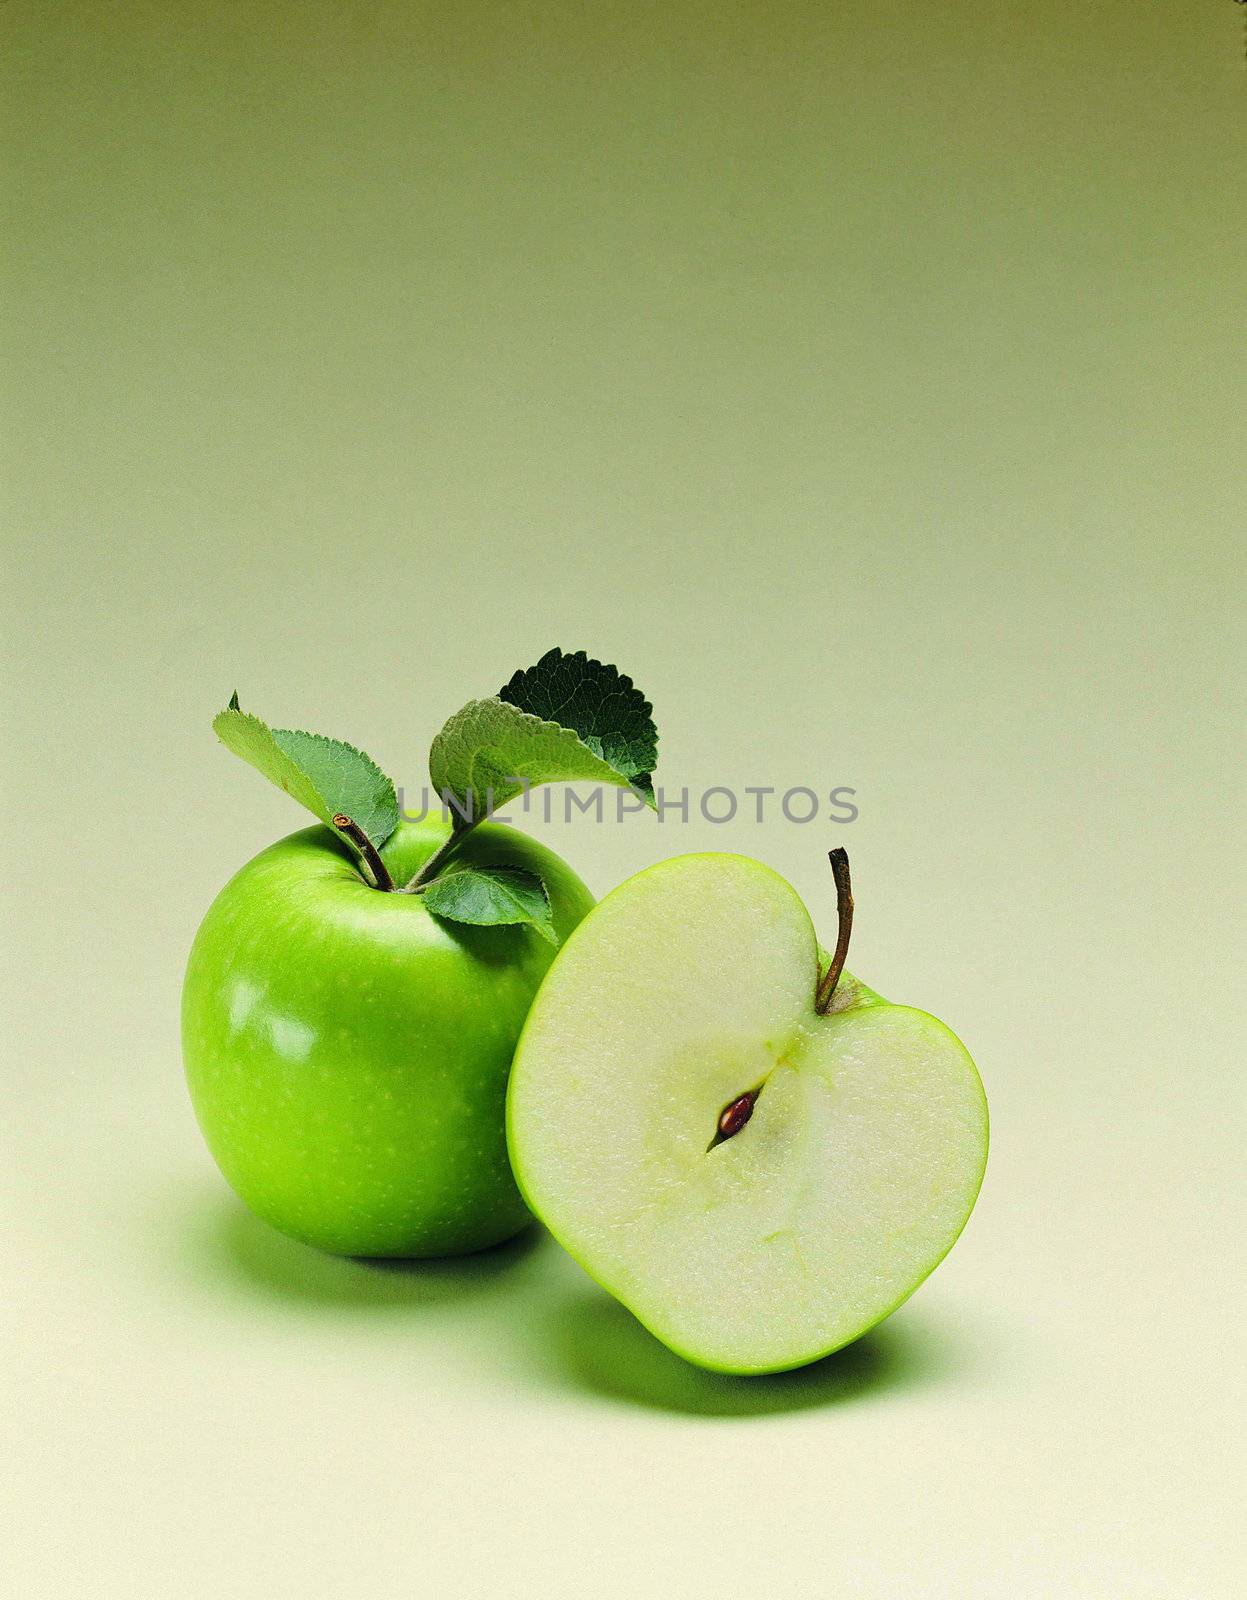 Ripe green apple with slices